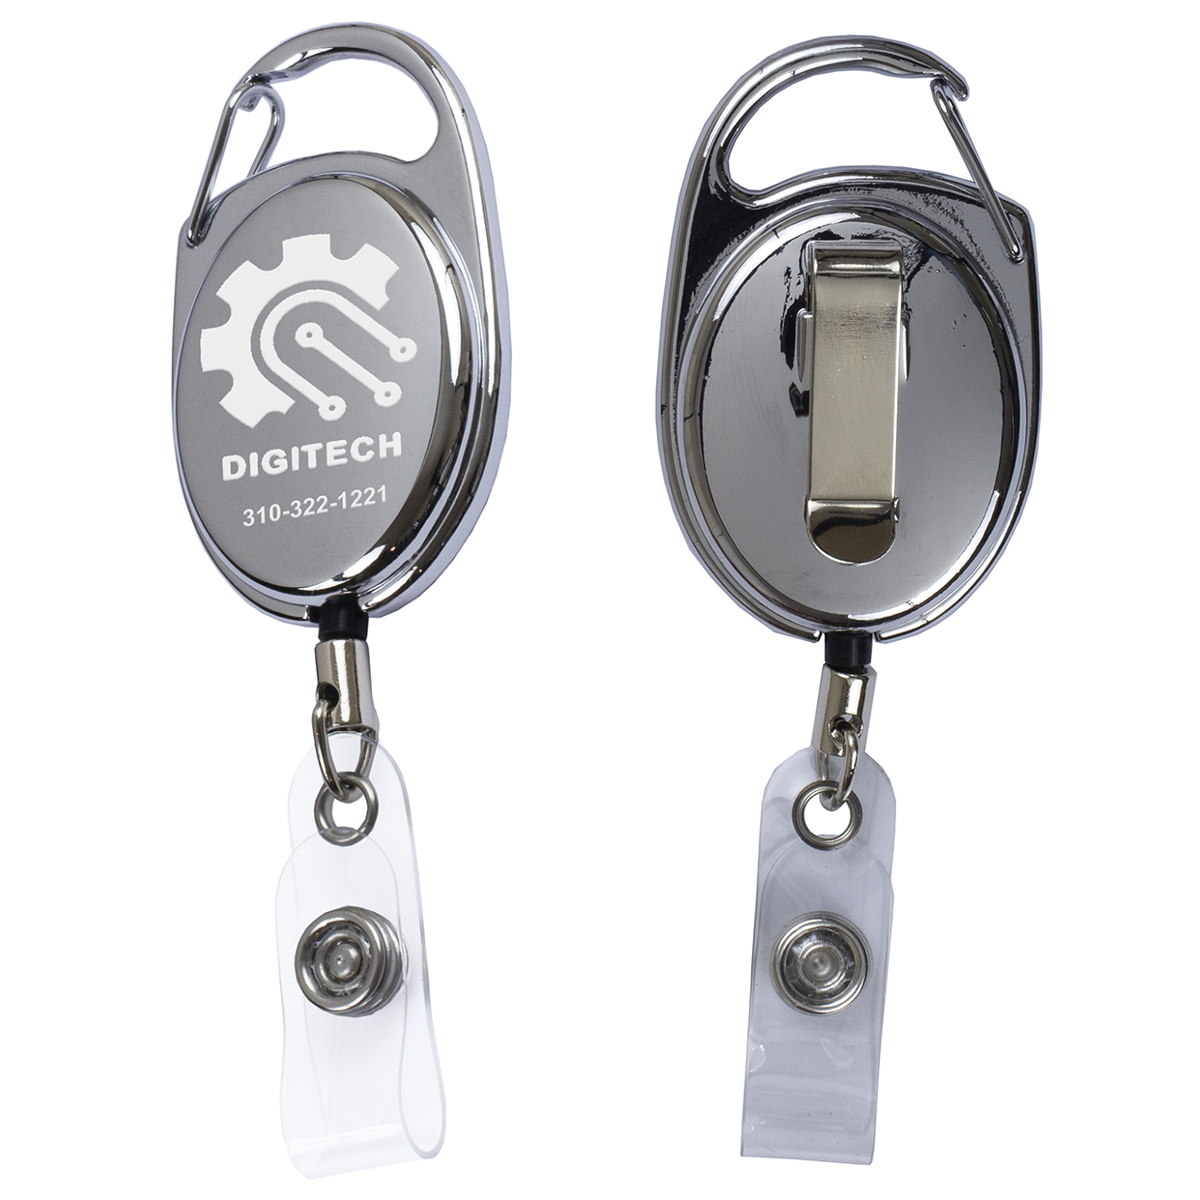 "PATASKALA" 30" Cord Shiny Chrome Finish Solid Metal Retractable Badge Reel and Badge Holder with Laser Imprint (Patent D539,122)